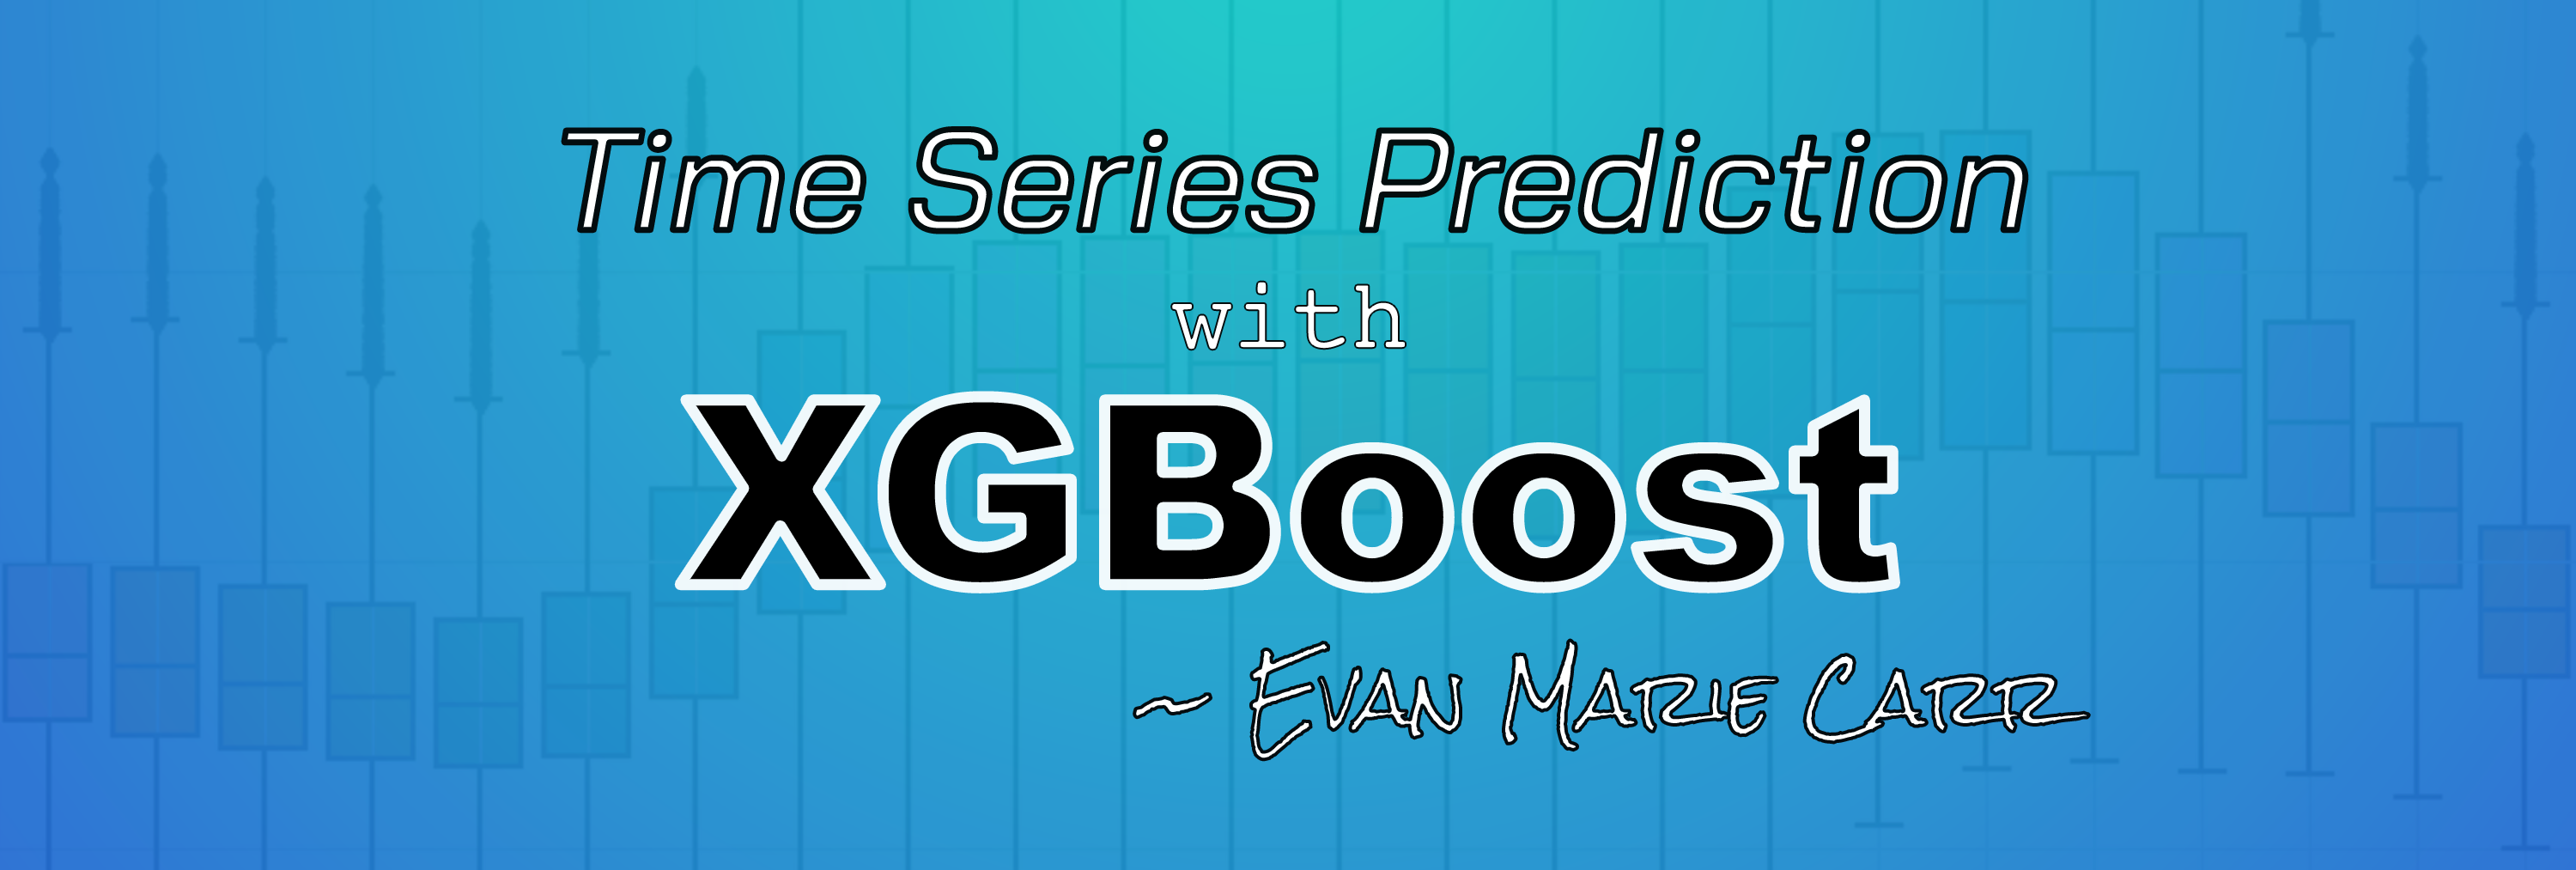 💪 XGBoost Time Series Prediction